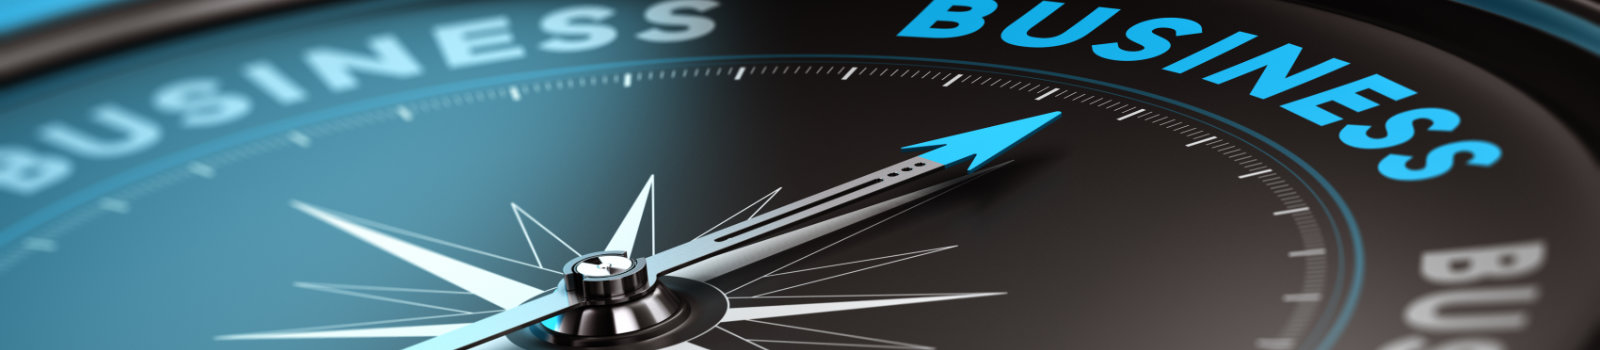 Conceptual compass with needle pointing the word business, black and blue tones. Concept background image for illustration of business consulting.